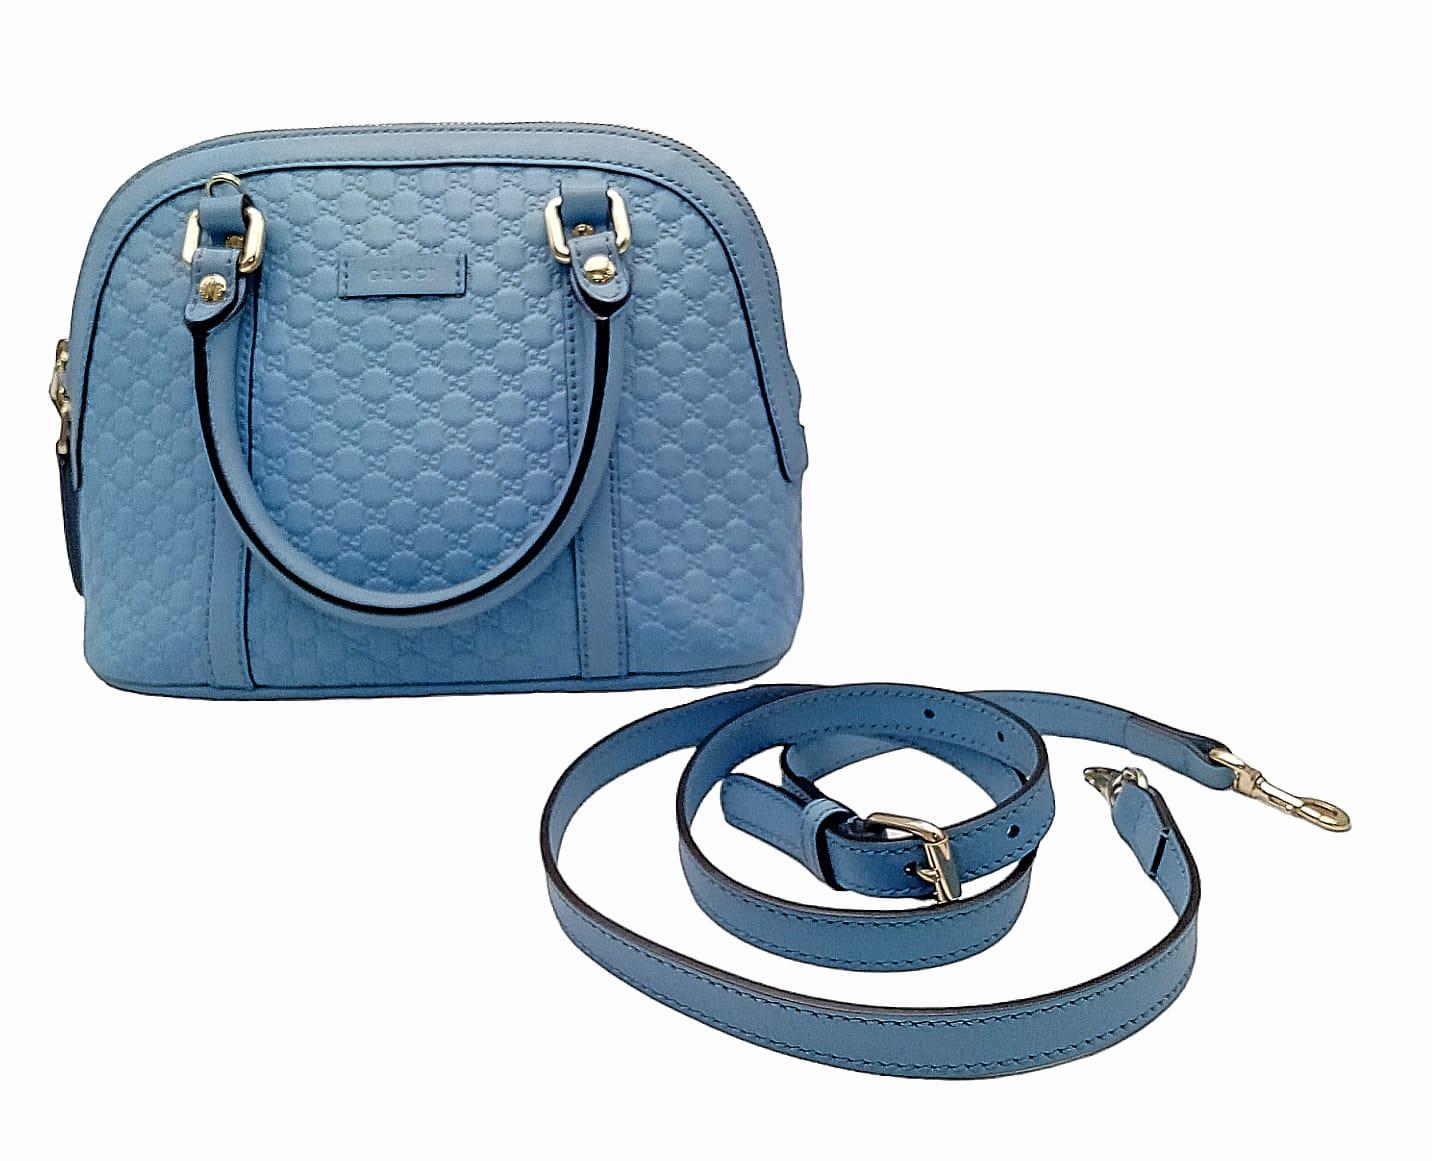 A Gucci Cornflower Blue Micro Guccisima Dome Bag. Monogram leather exterior with rolled leather